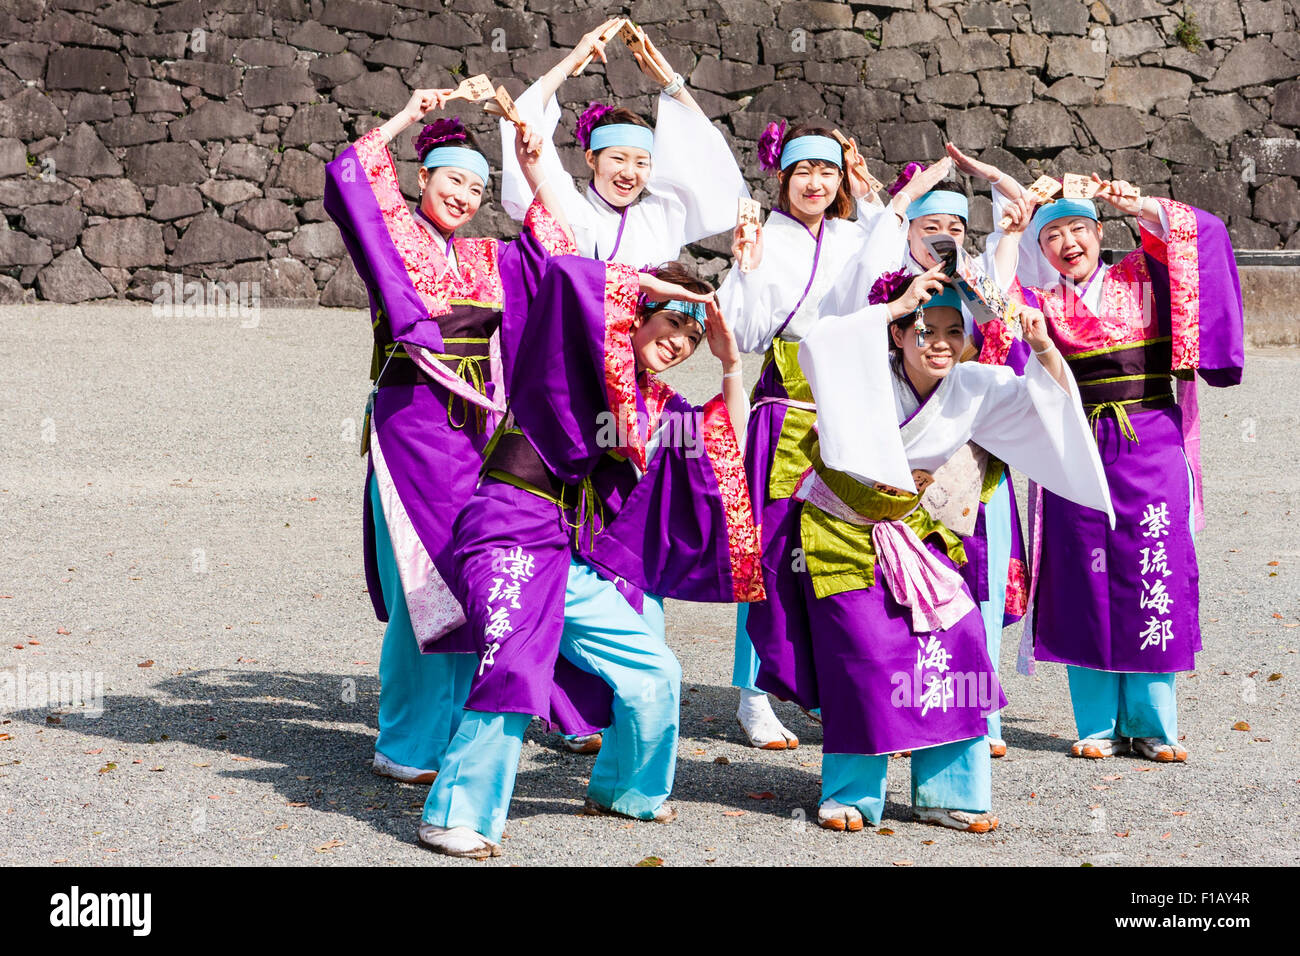 Japanese yosakoi dance team of smiling young women posing for photograph with their arms raised in front of Kumamoto castle stone wall. Stock Photo